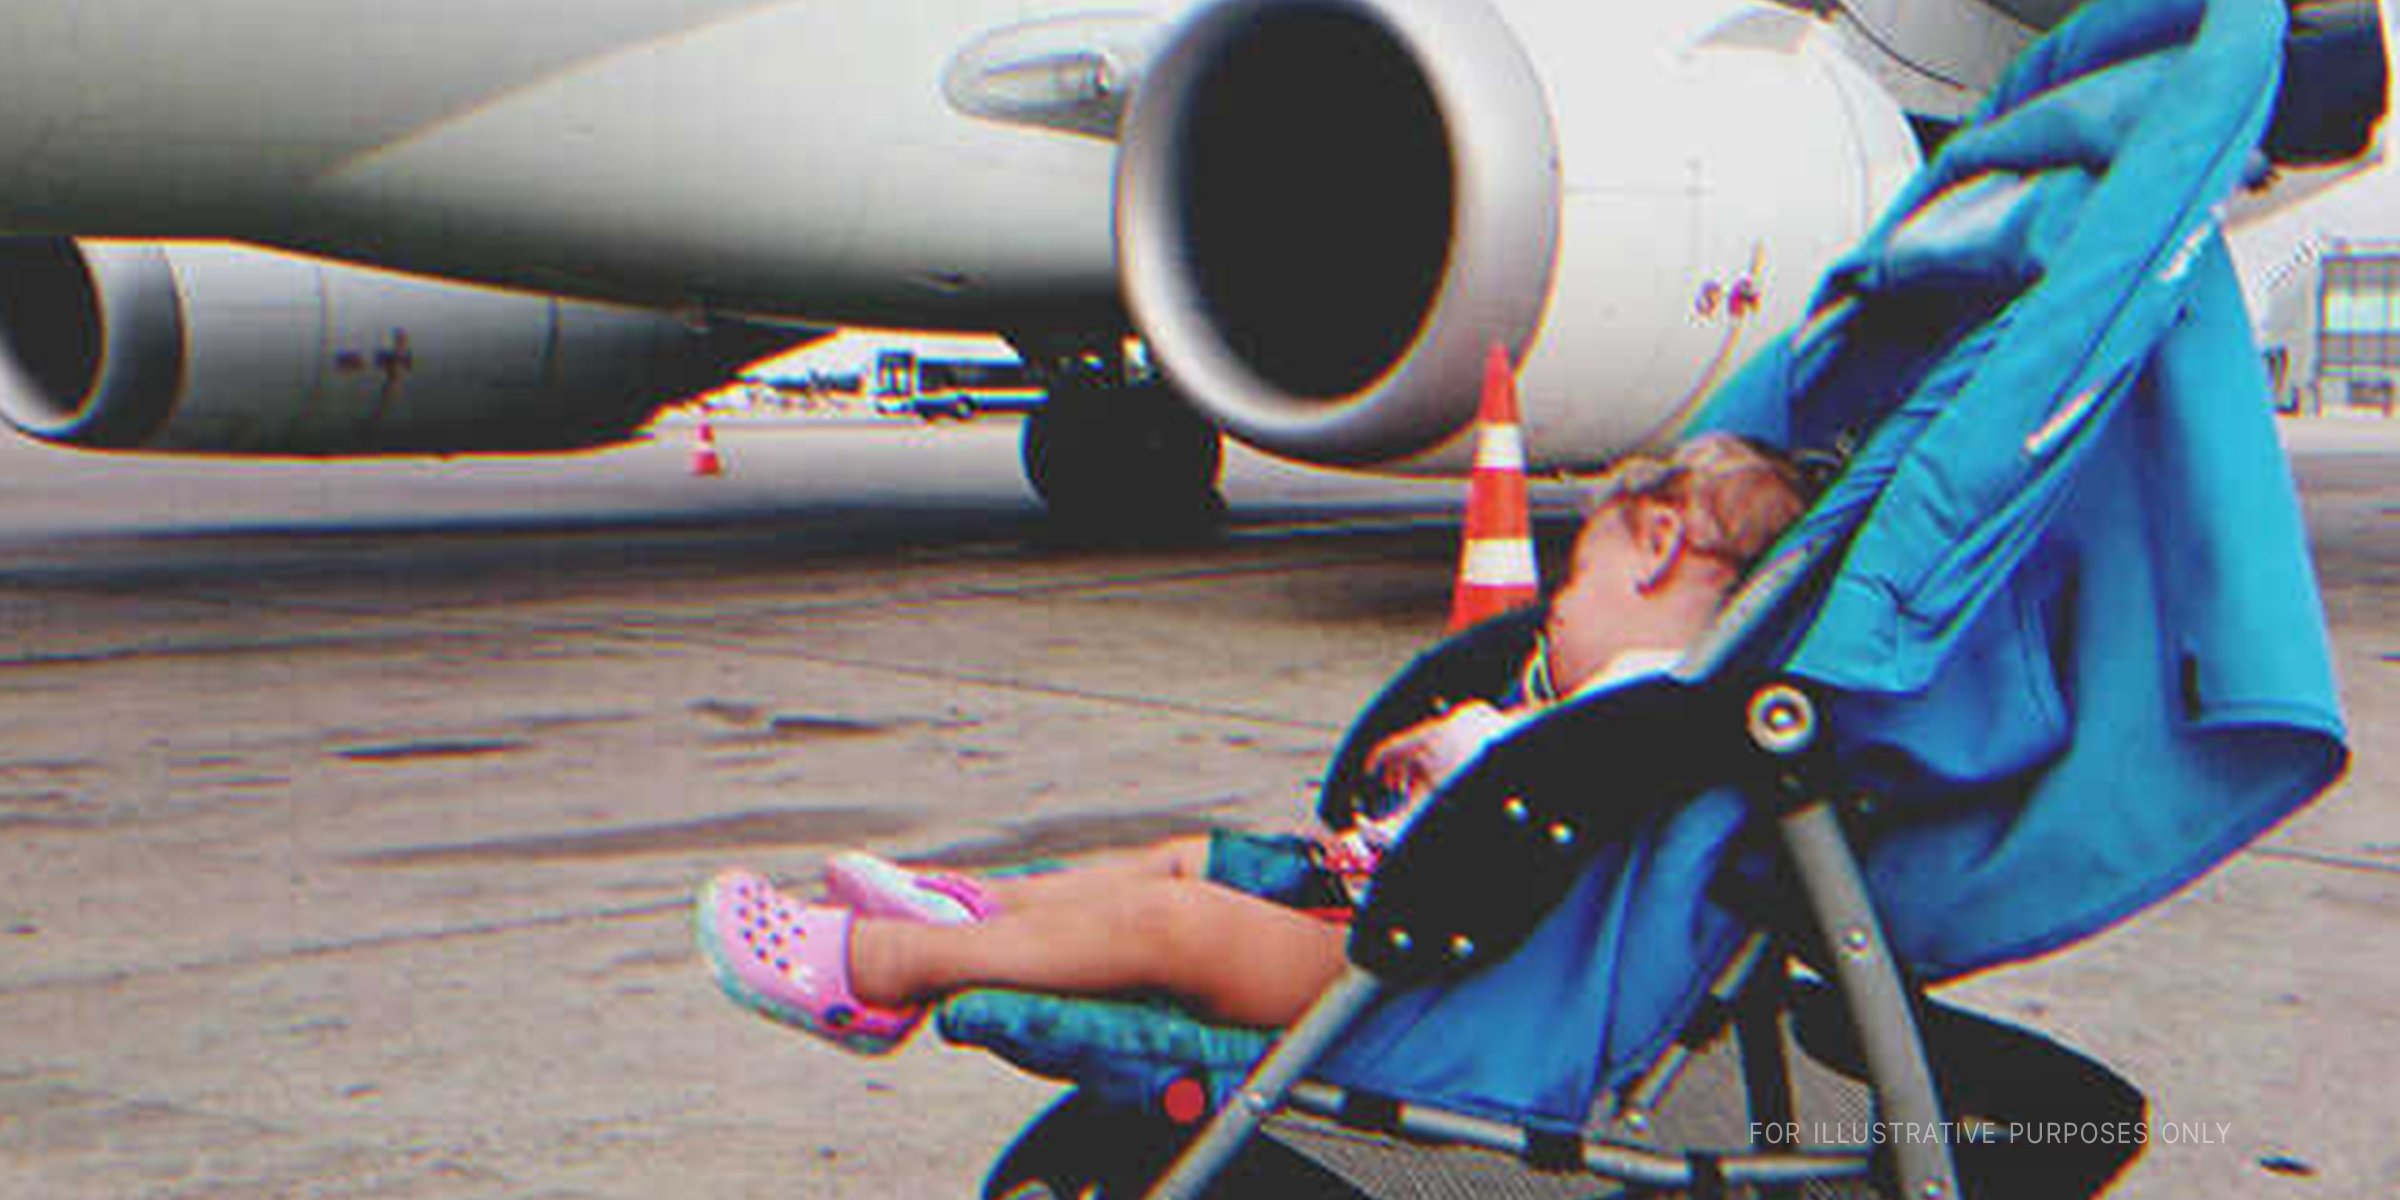 Little girl in a stroller in front of a plane | Source: Getty Images